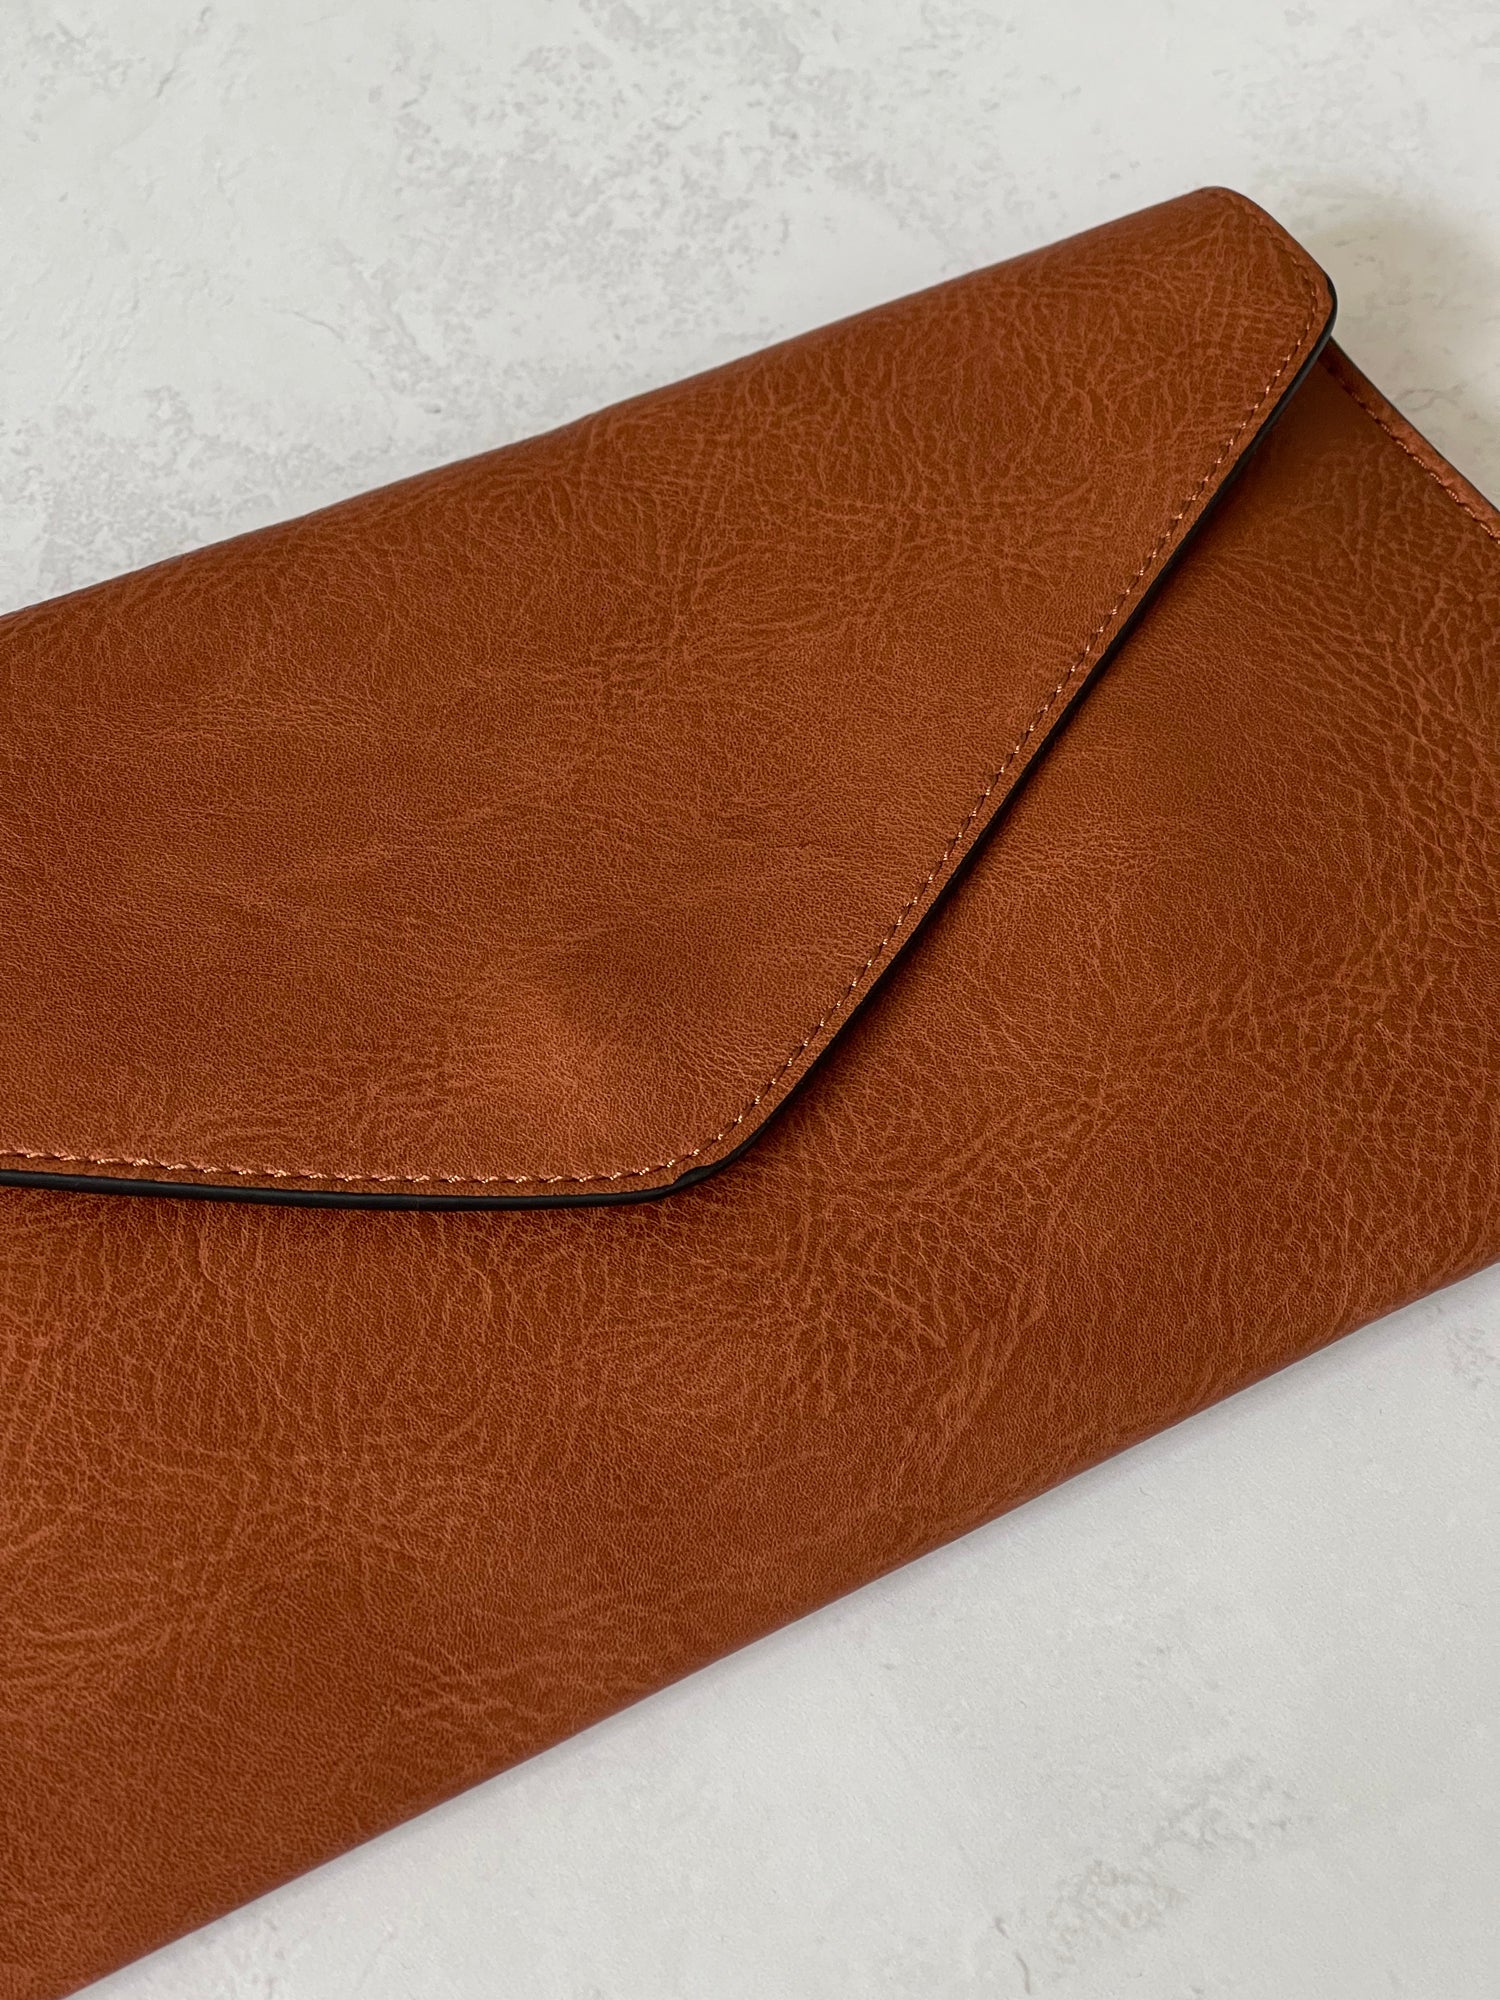 BROWN OVER-SIZED ENVELOPE CLUTCH BAG WITH LONG CROSS BODY AND WRISTLET STRAP